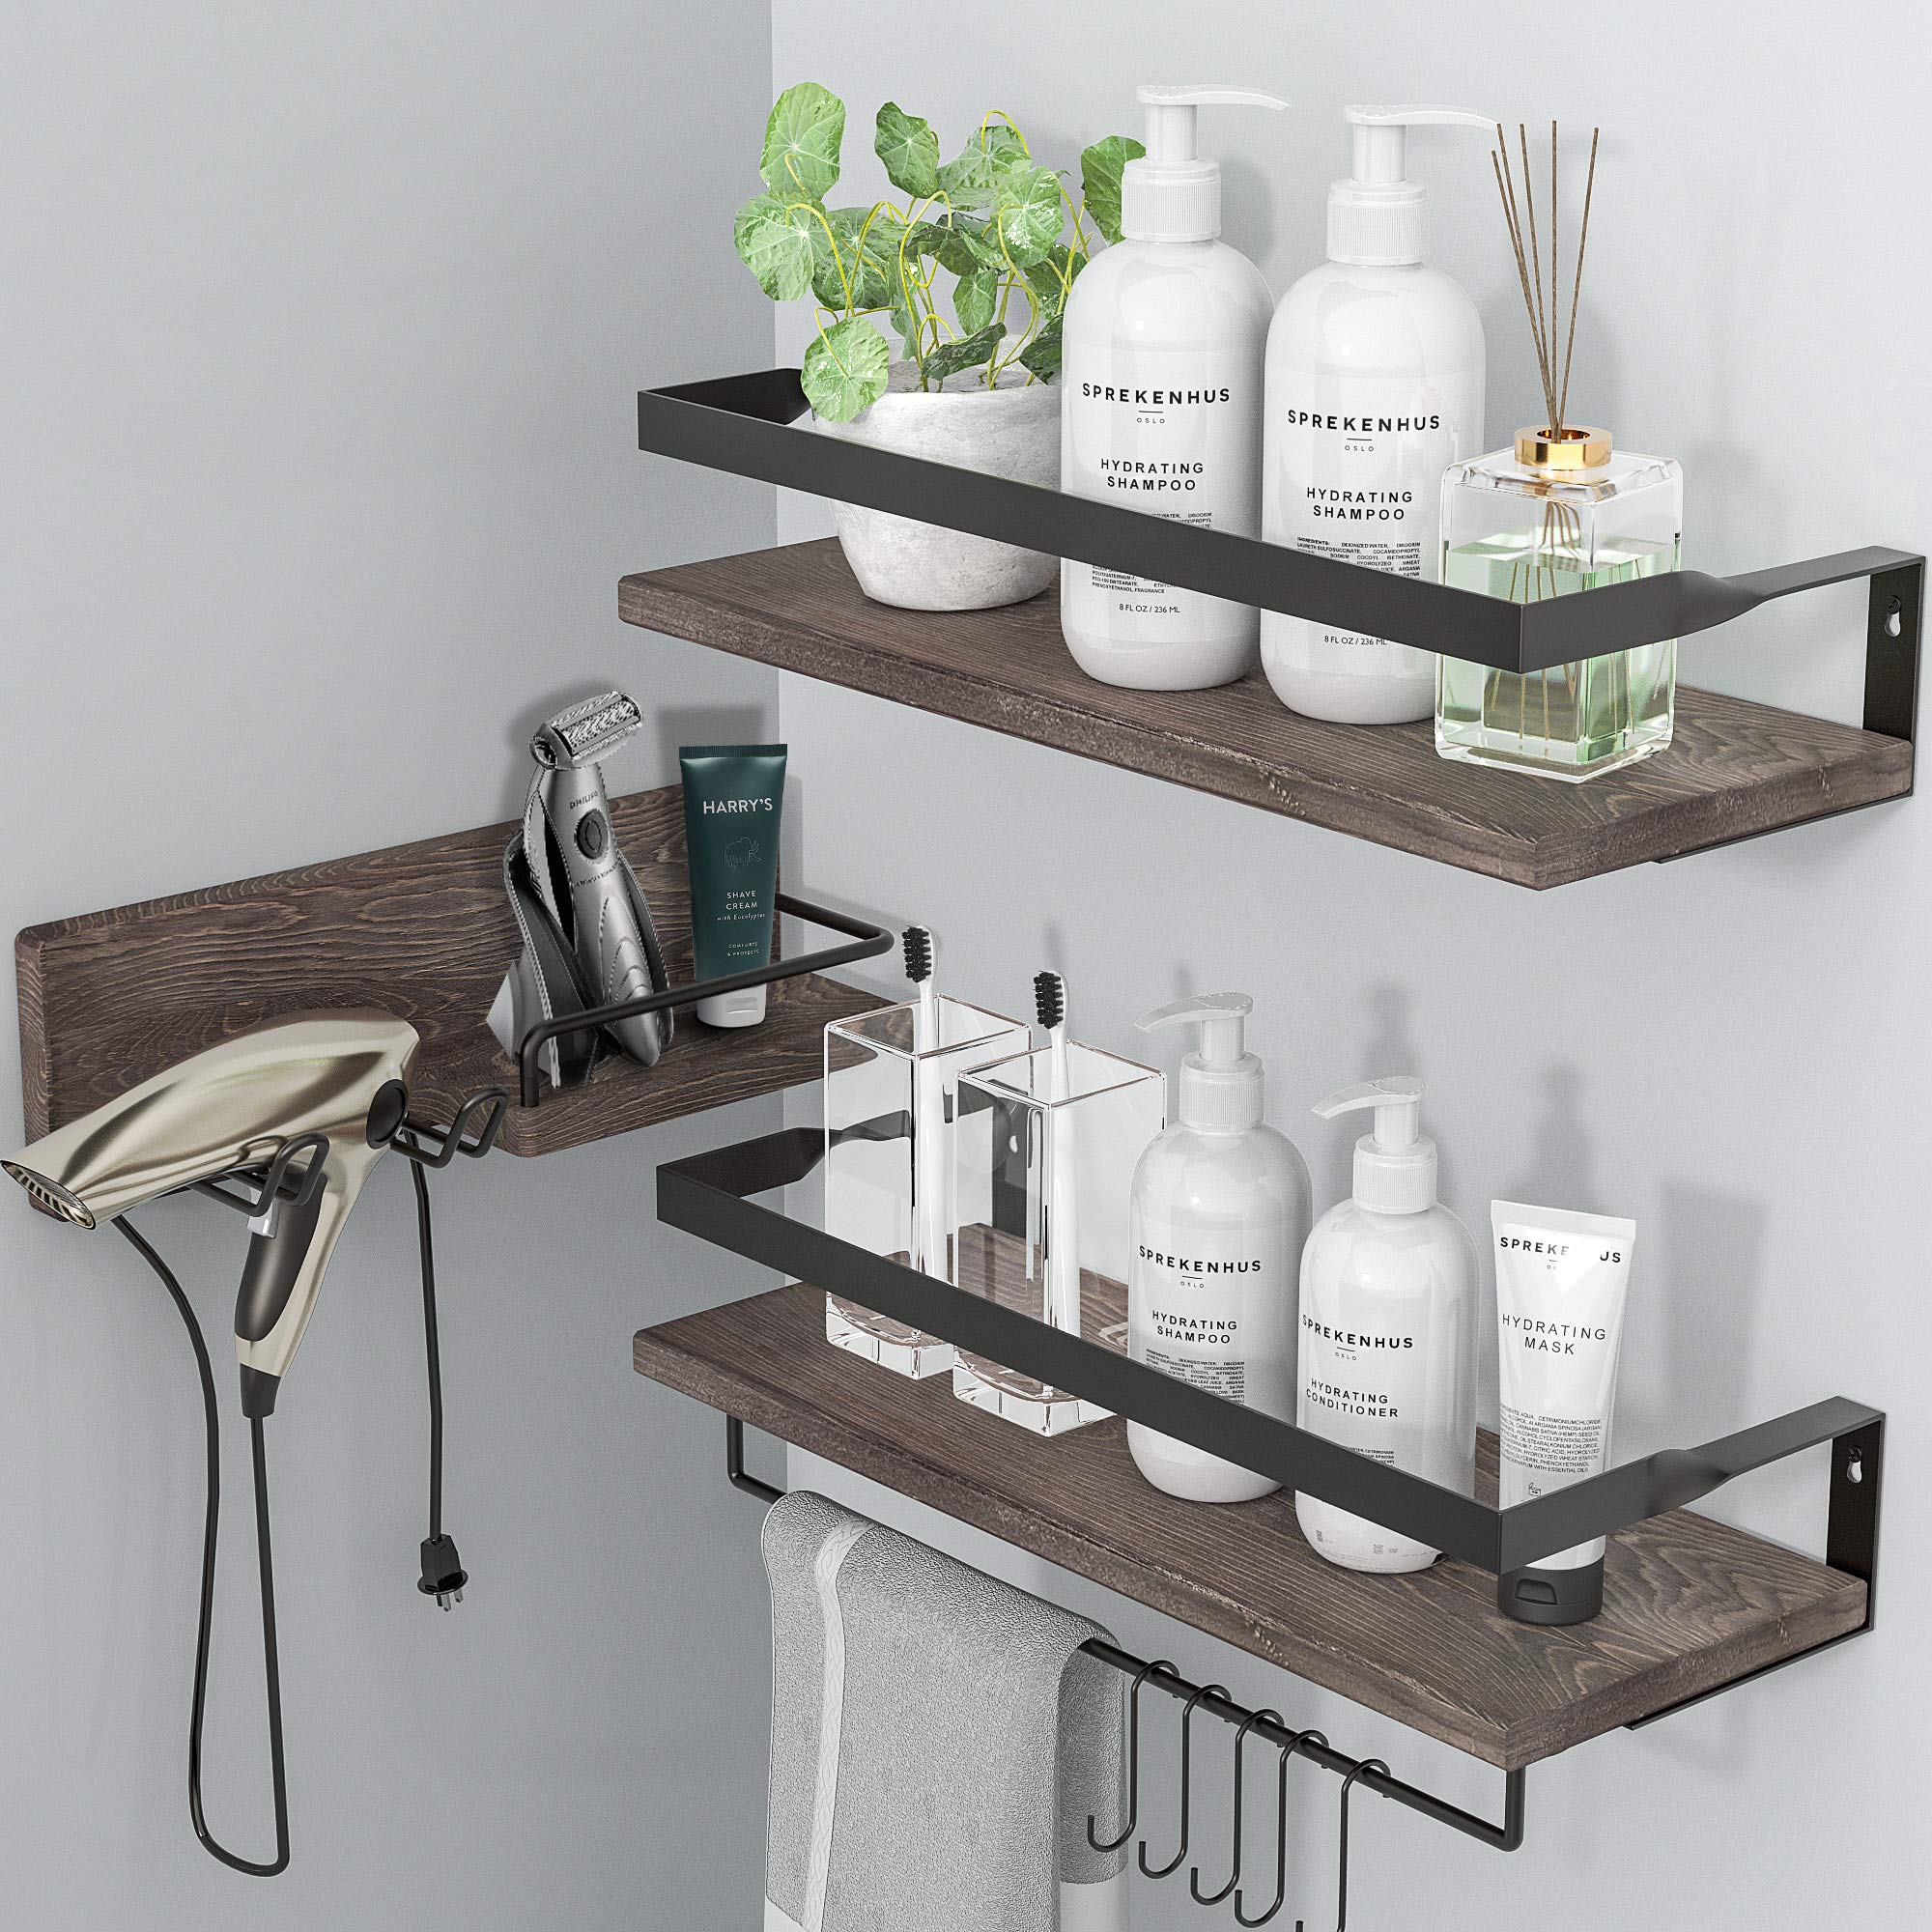 LYNNC 3 in 1 Rustic Floating Shelves, Decorative Storage Shelves